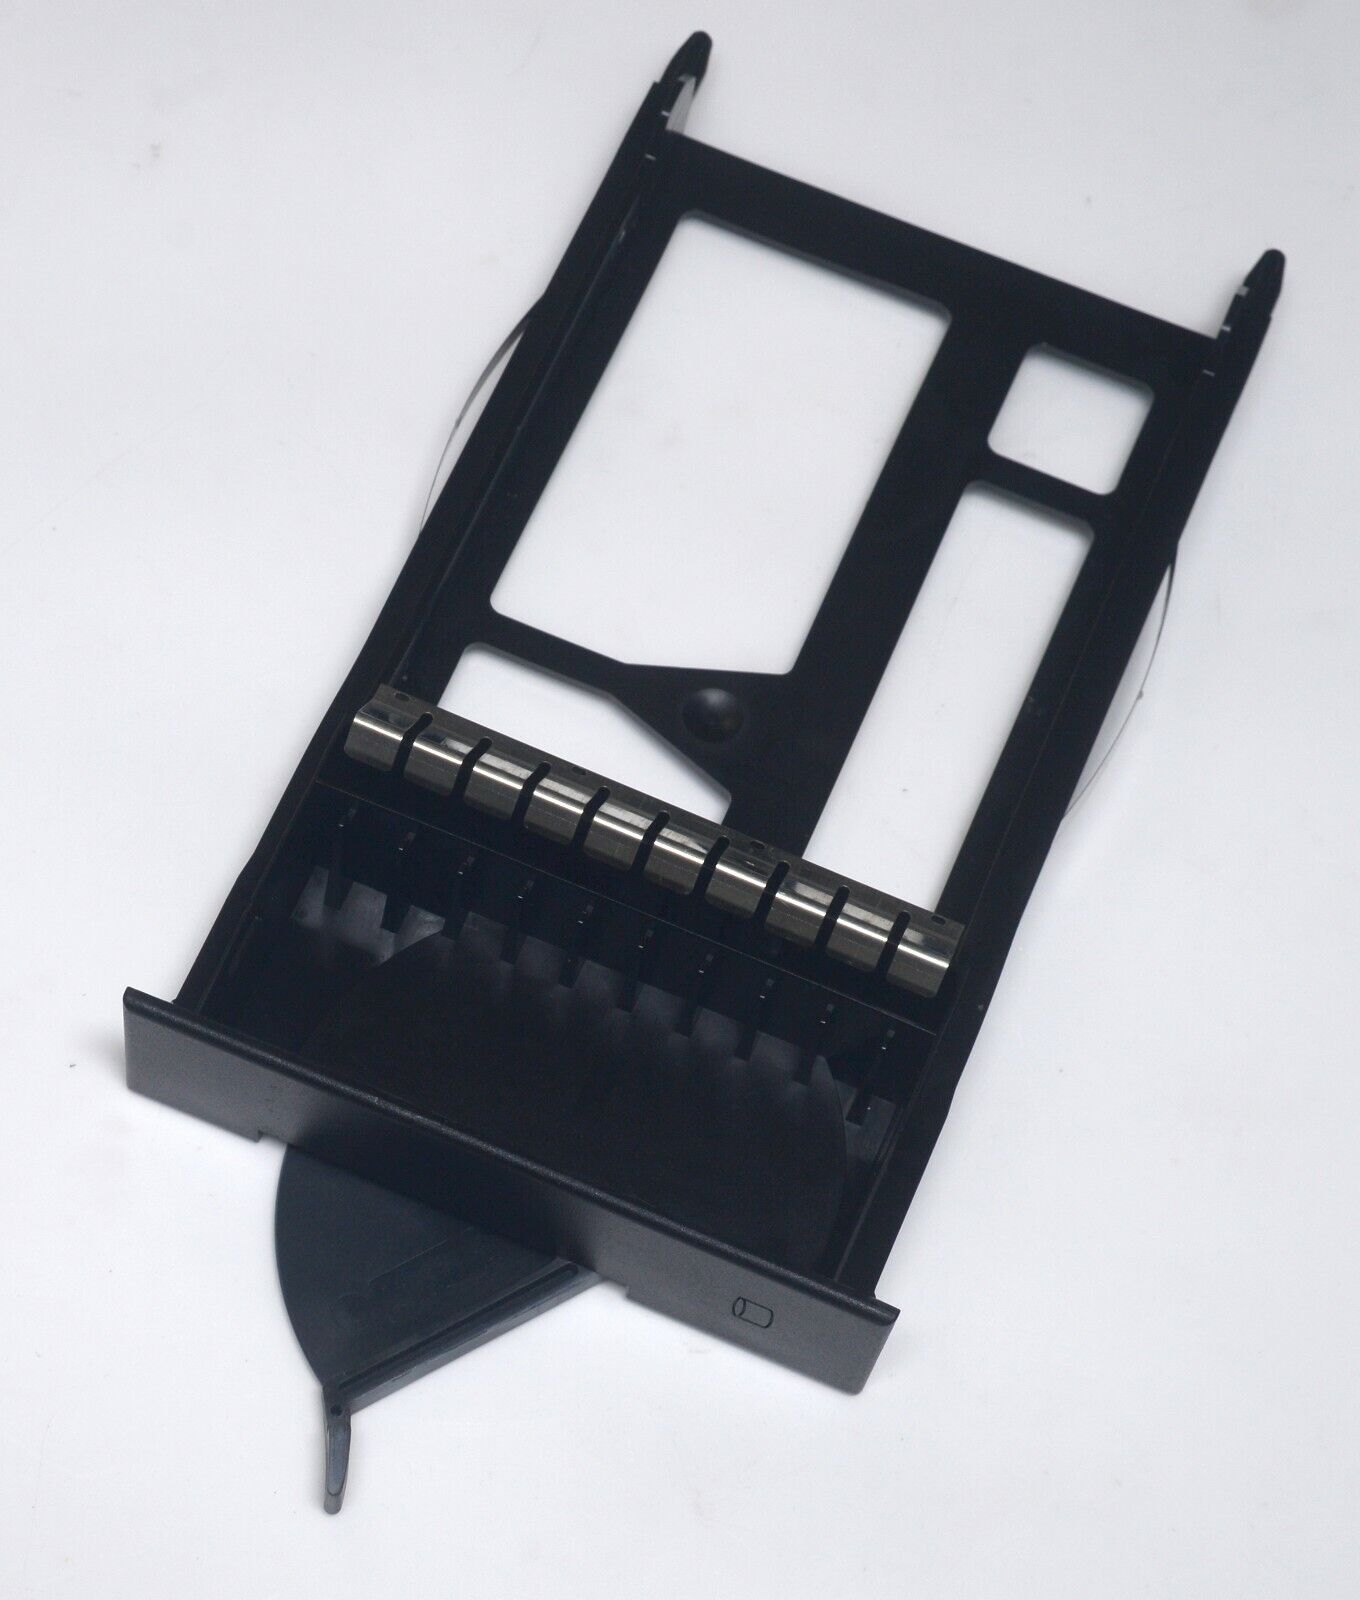 #013-2170-001 Hard Drive Caddy Tray 050-0485-001 Silicon Graphics O2 WorkStation